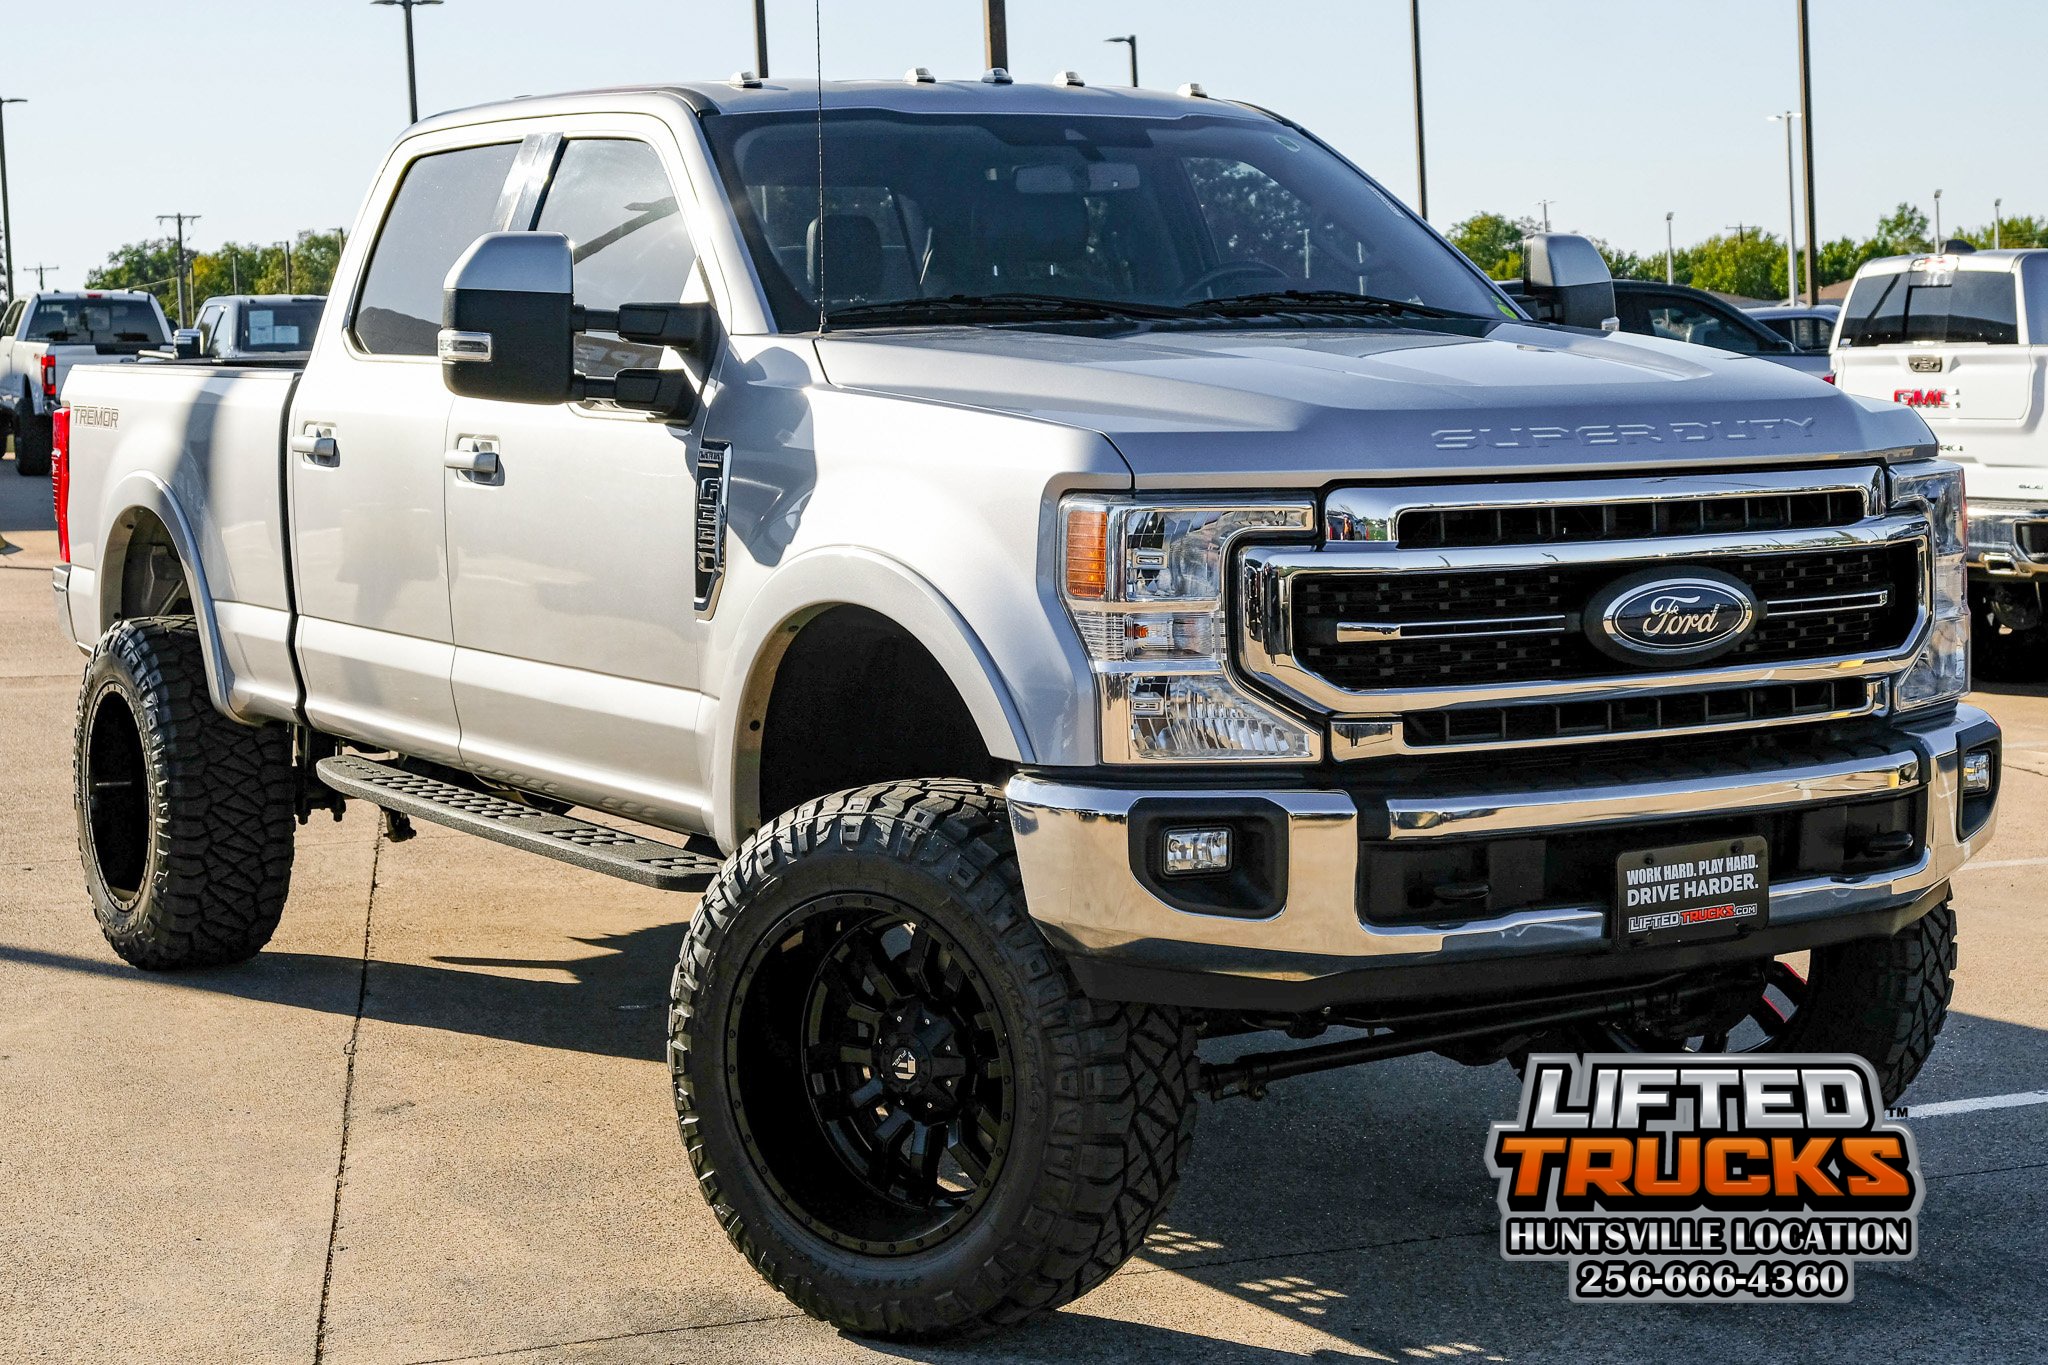 This 2018 Ford F250 custom build moves the 4x4 needle